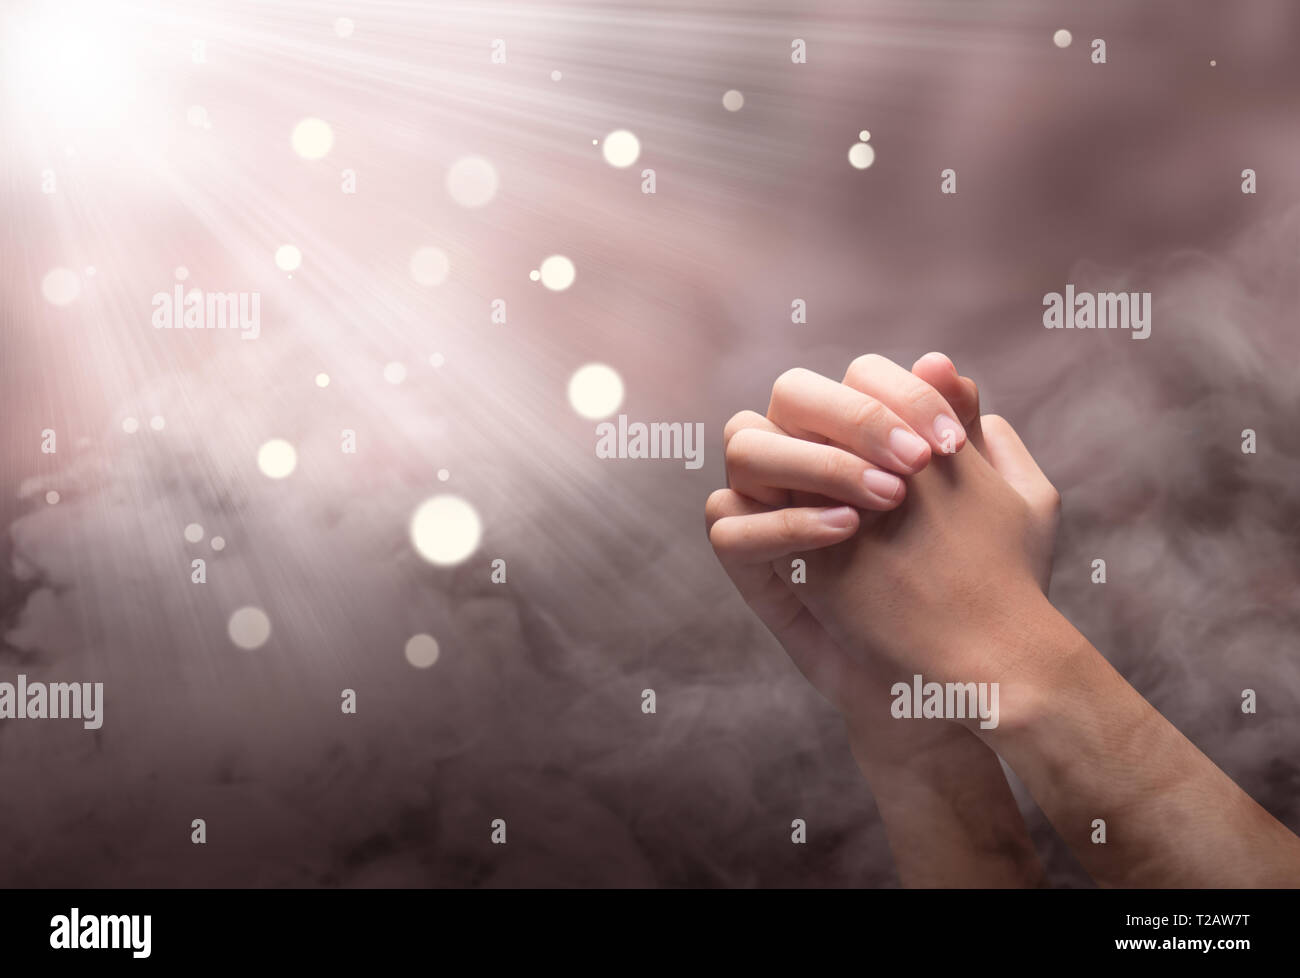 Male hands in praying position with ray over blurry background Stock Photo